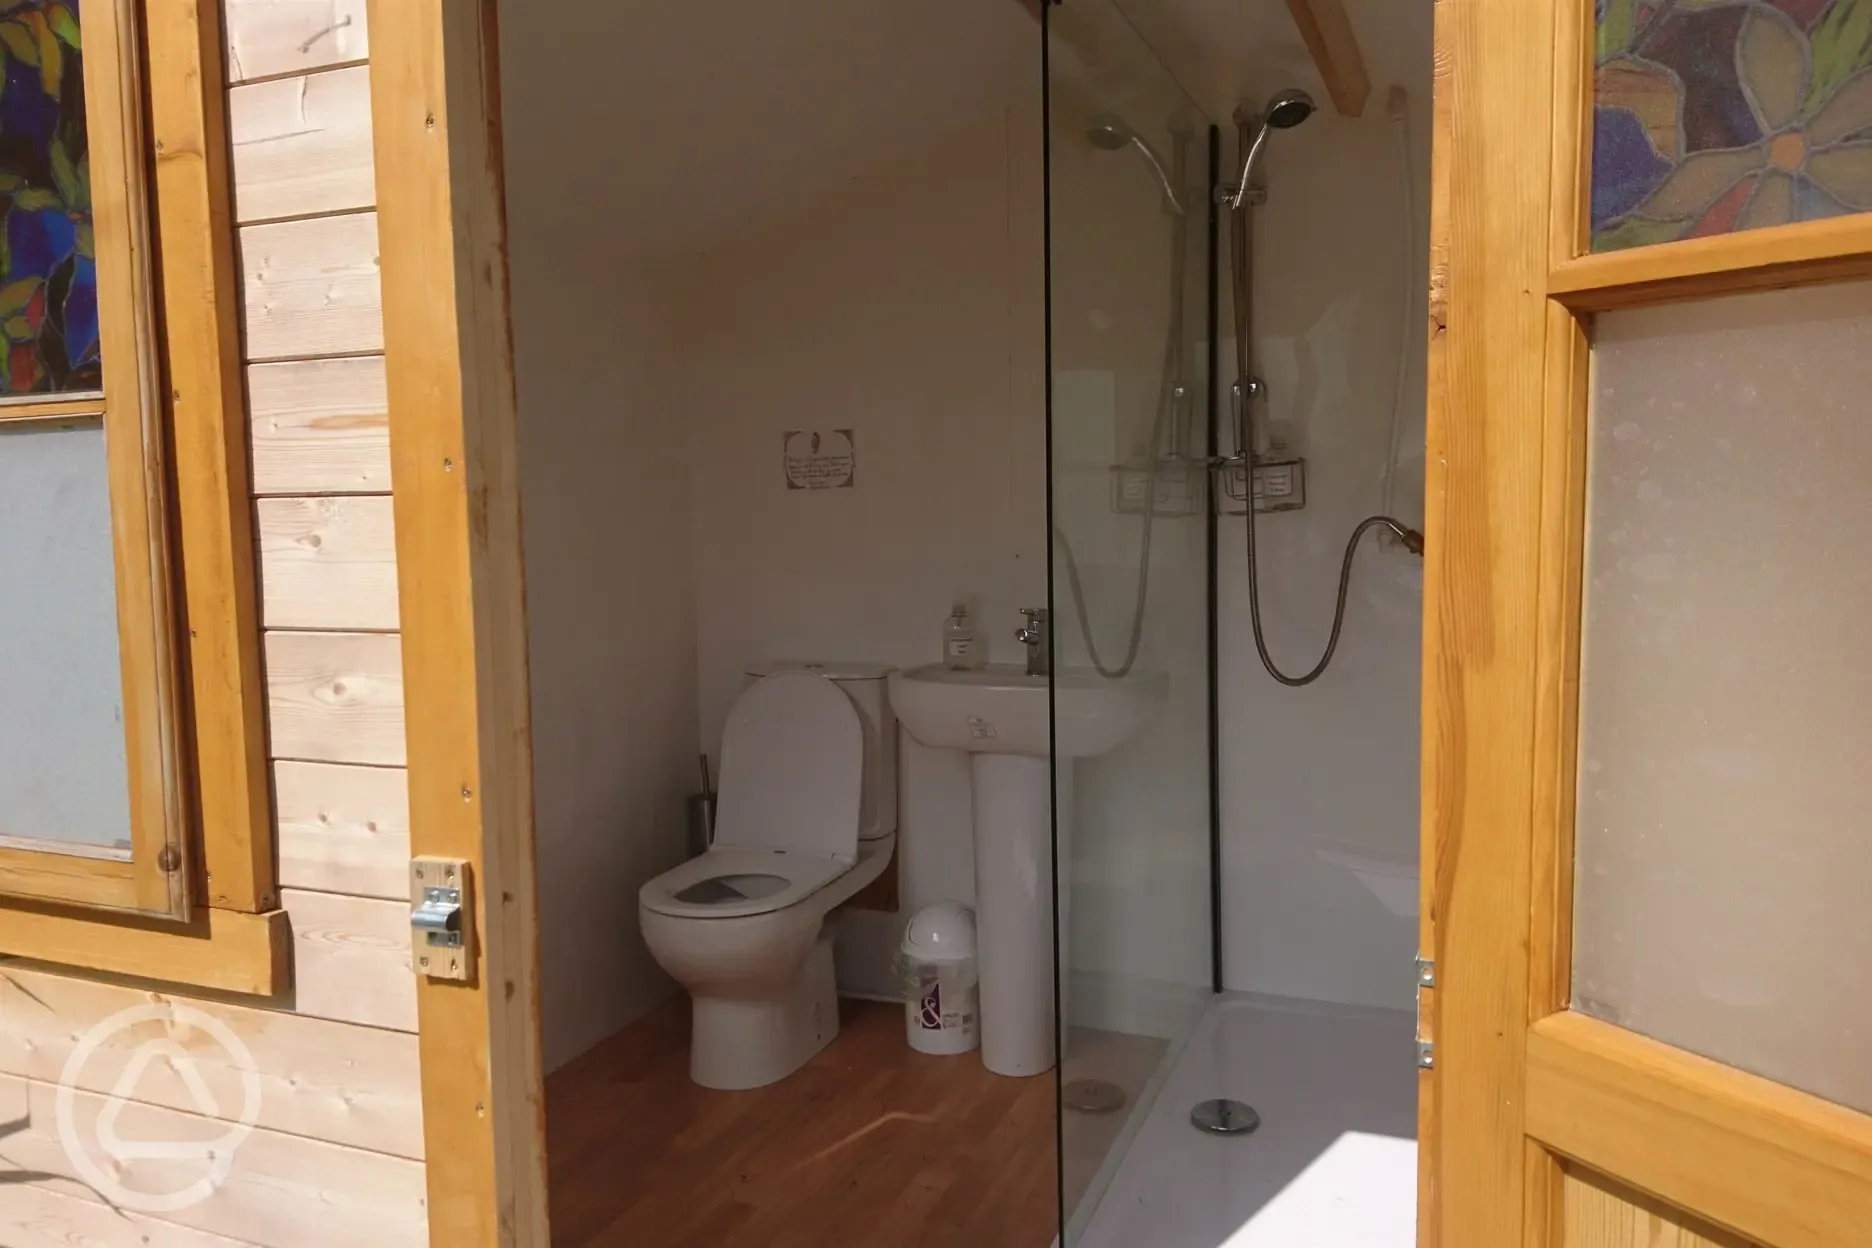 One of the individual shower-toilet units. Inside lockable 